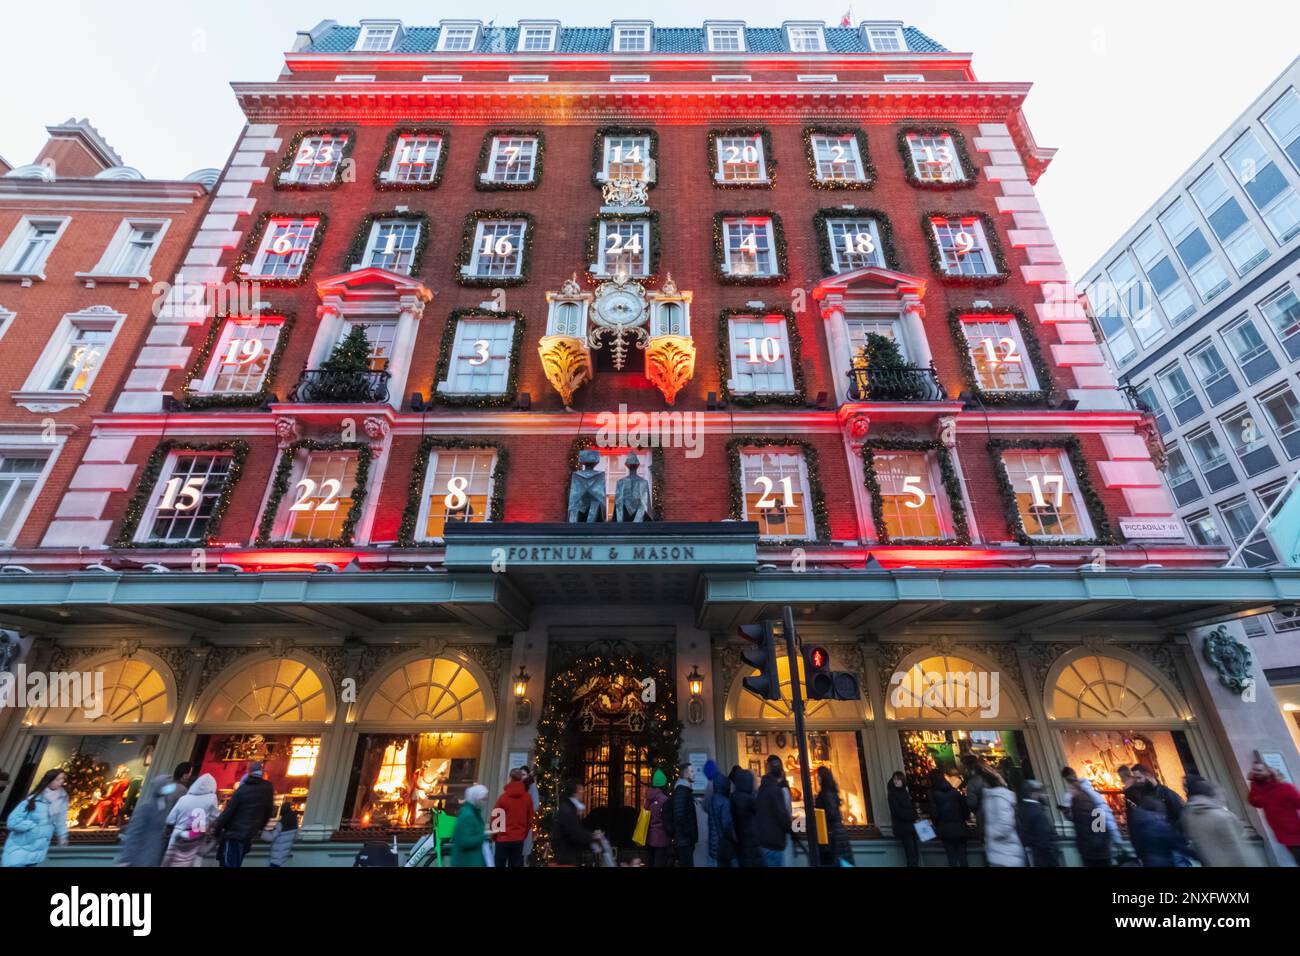 England, London, Piccadilly, Exterior View Fortnum & Mason Store with Christmas Decorations Stock Photo